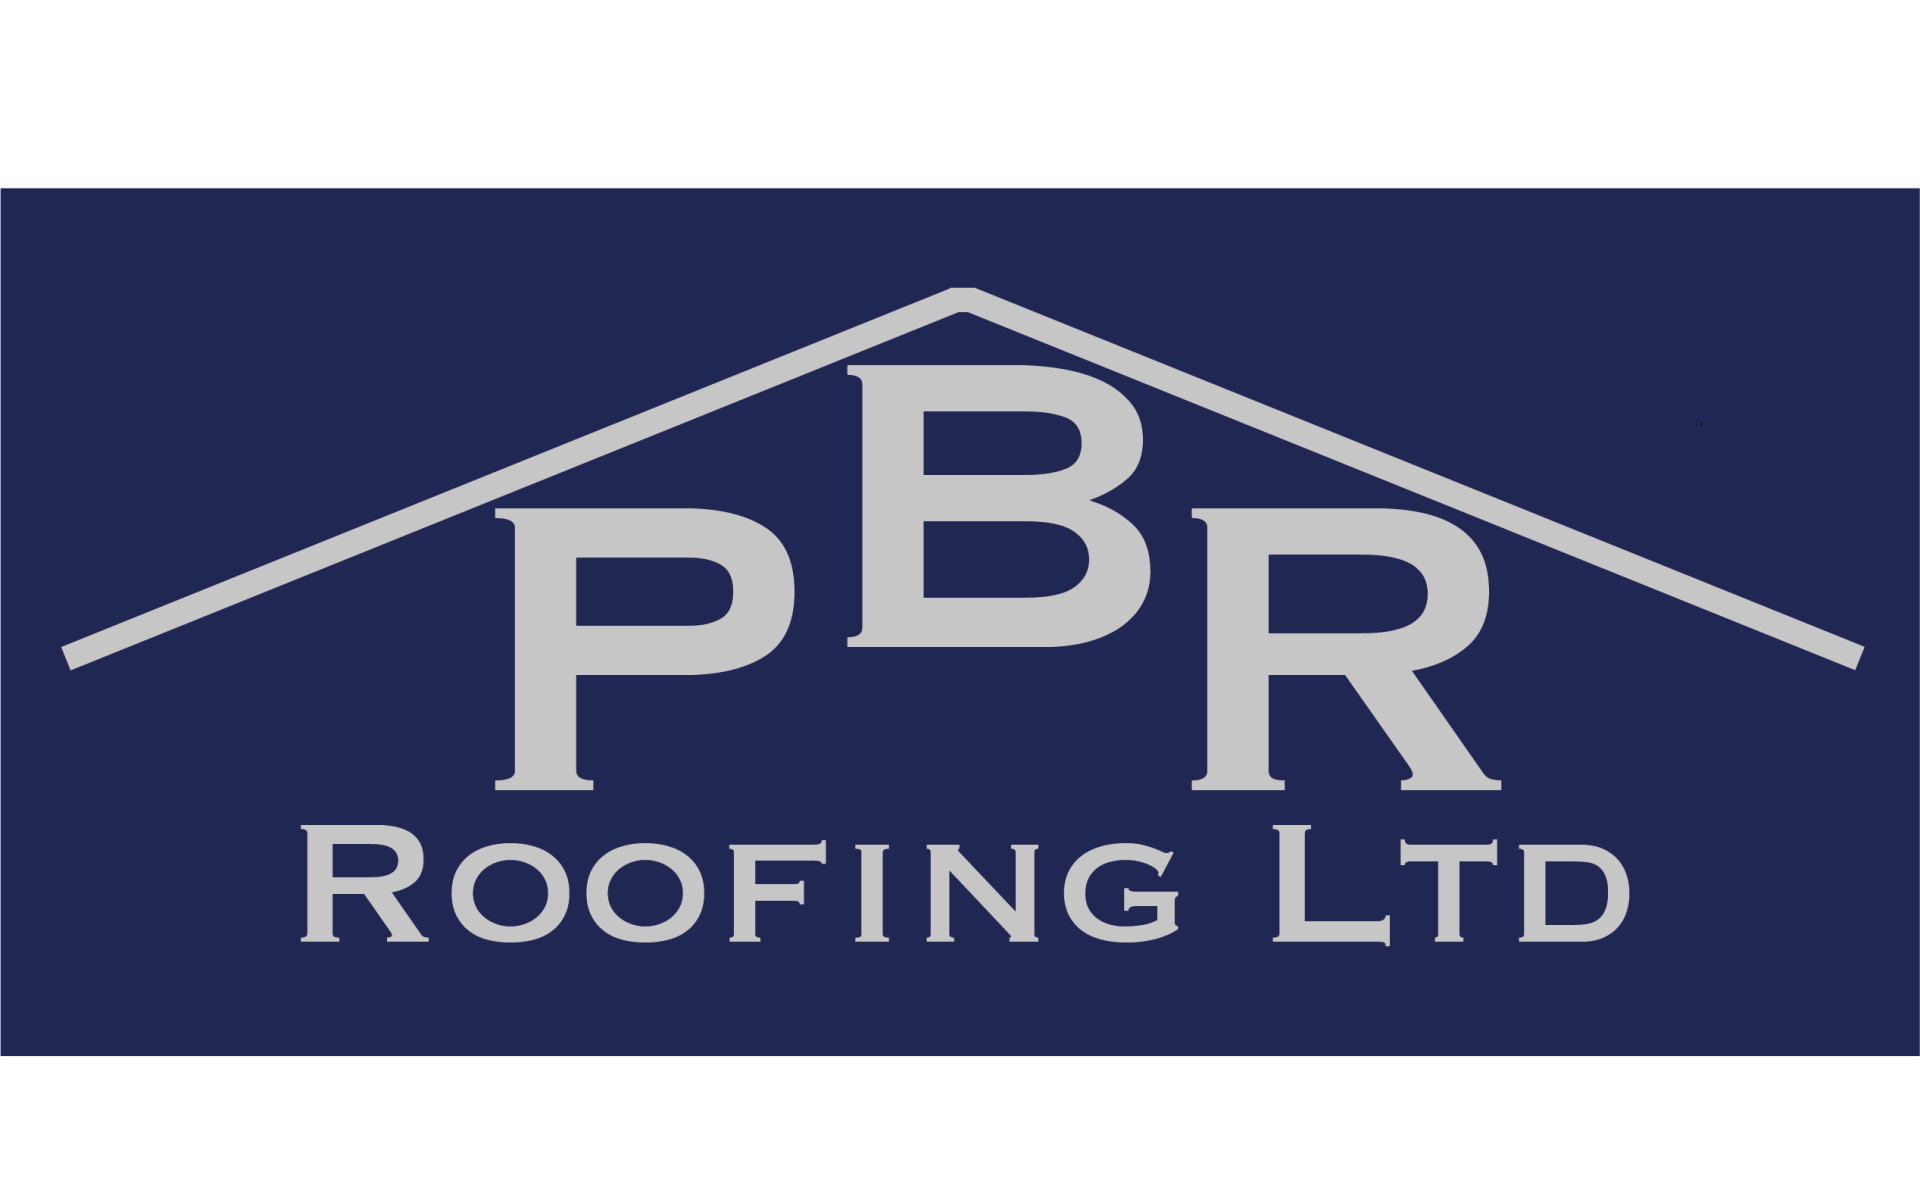 Paul's Roofing Services company logo